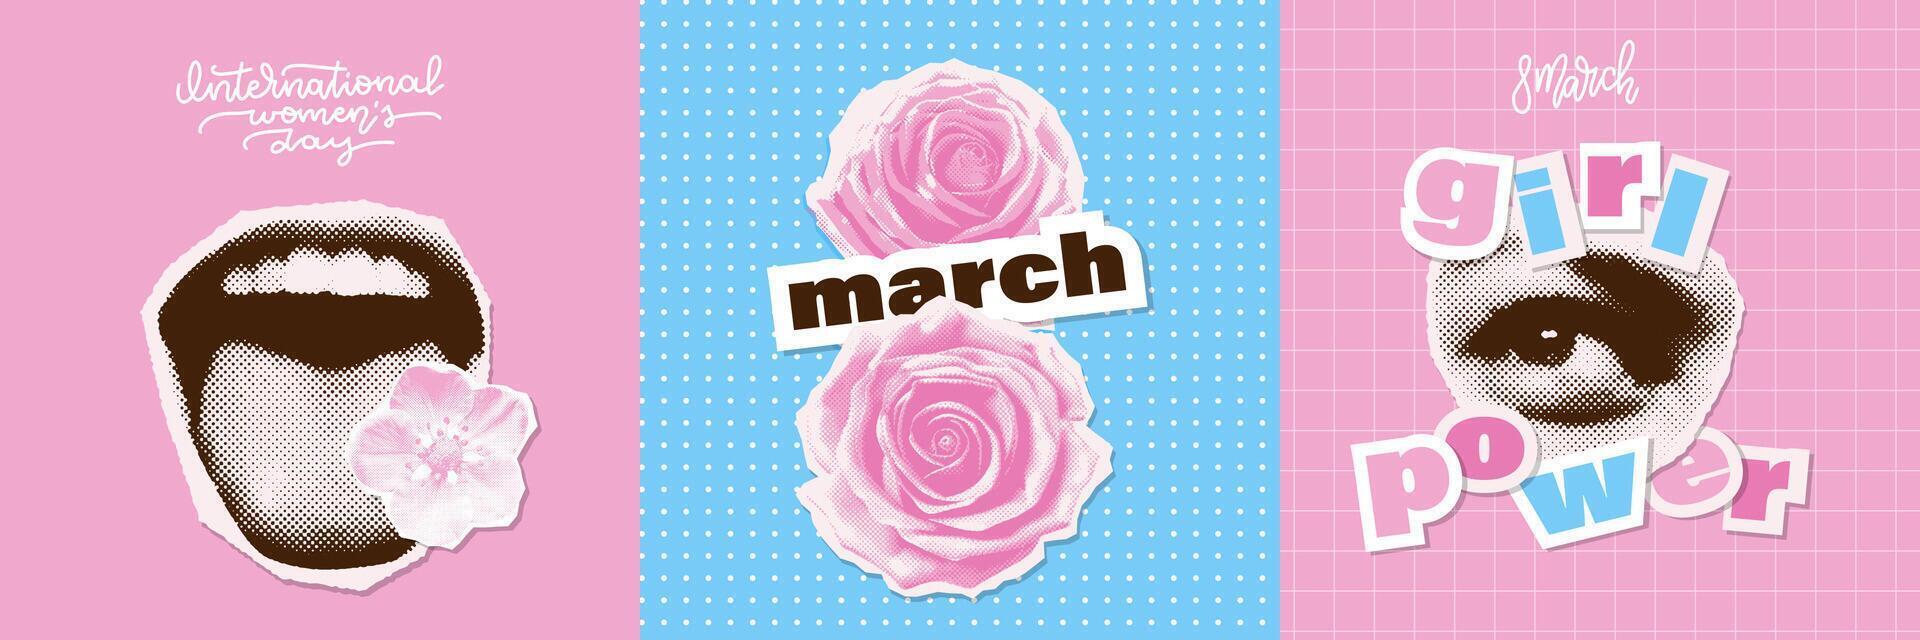 March 8 international women's day halftone collage cards set. Trendy Girl power concept. Vector illustrations. Typography banners. Background for a poster, t-shirt or banner.